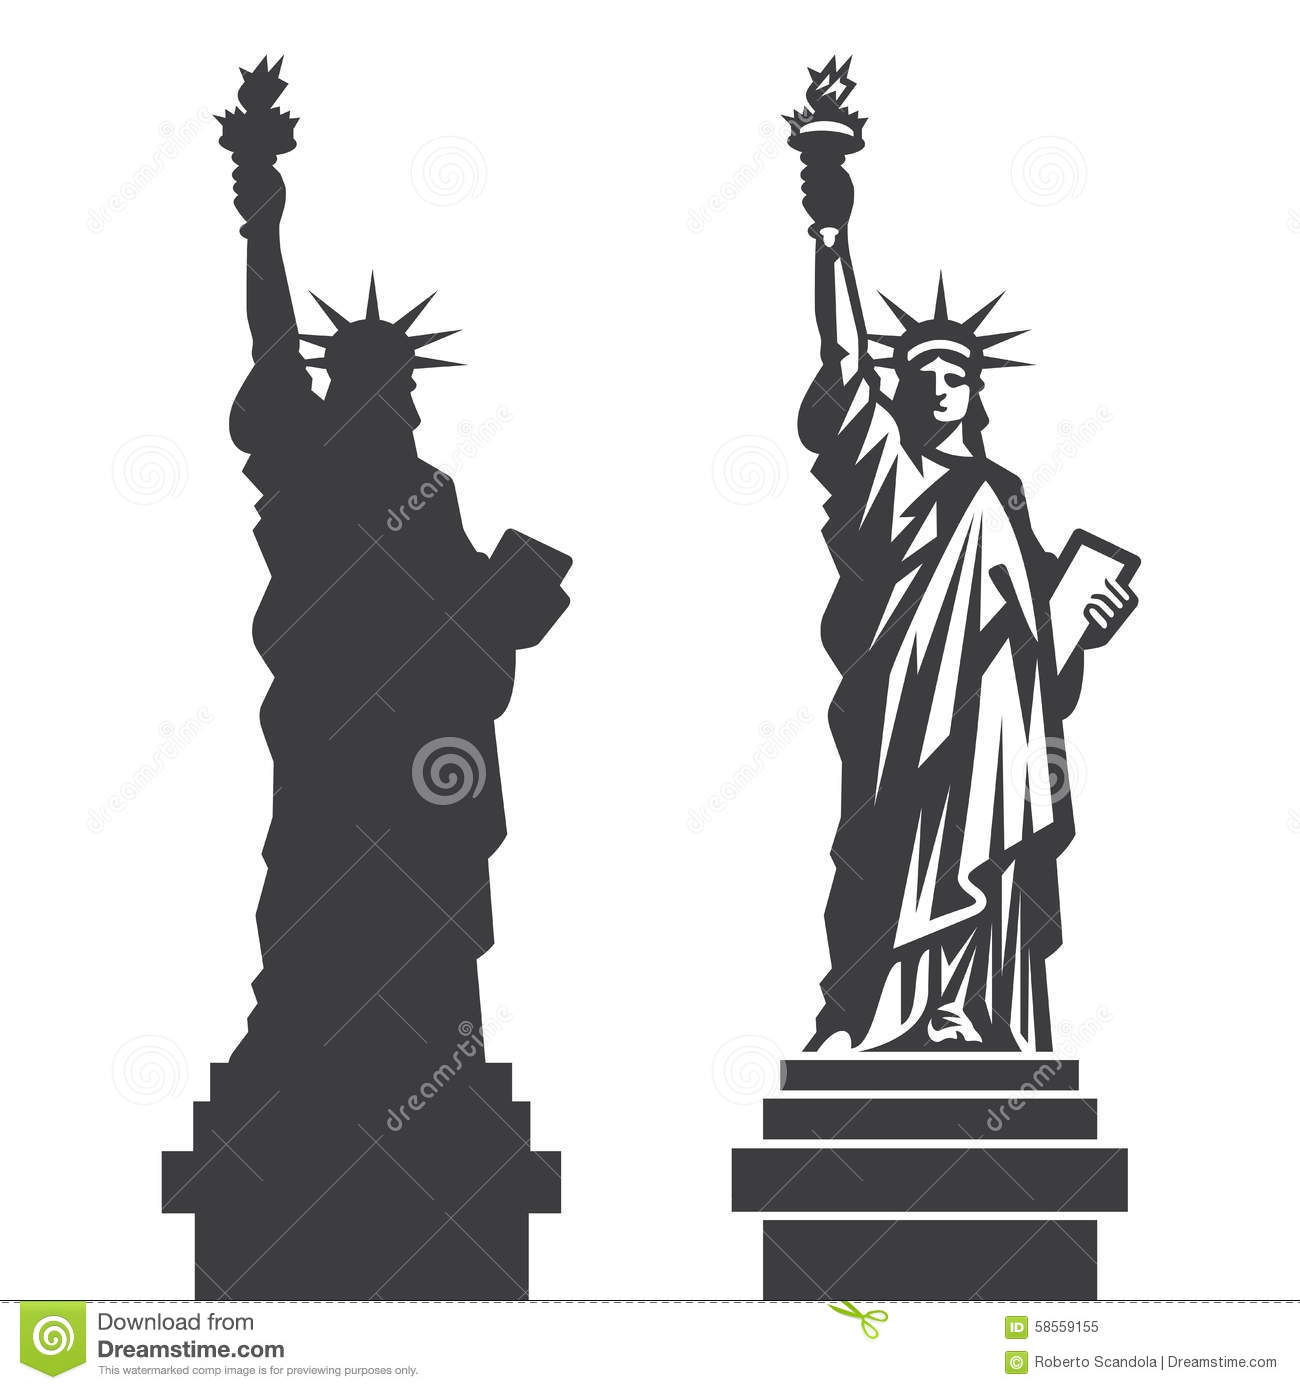 New York Statue Of Liberty Clipart.